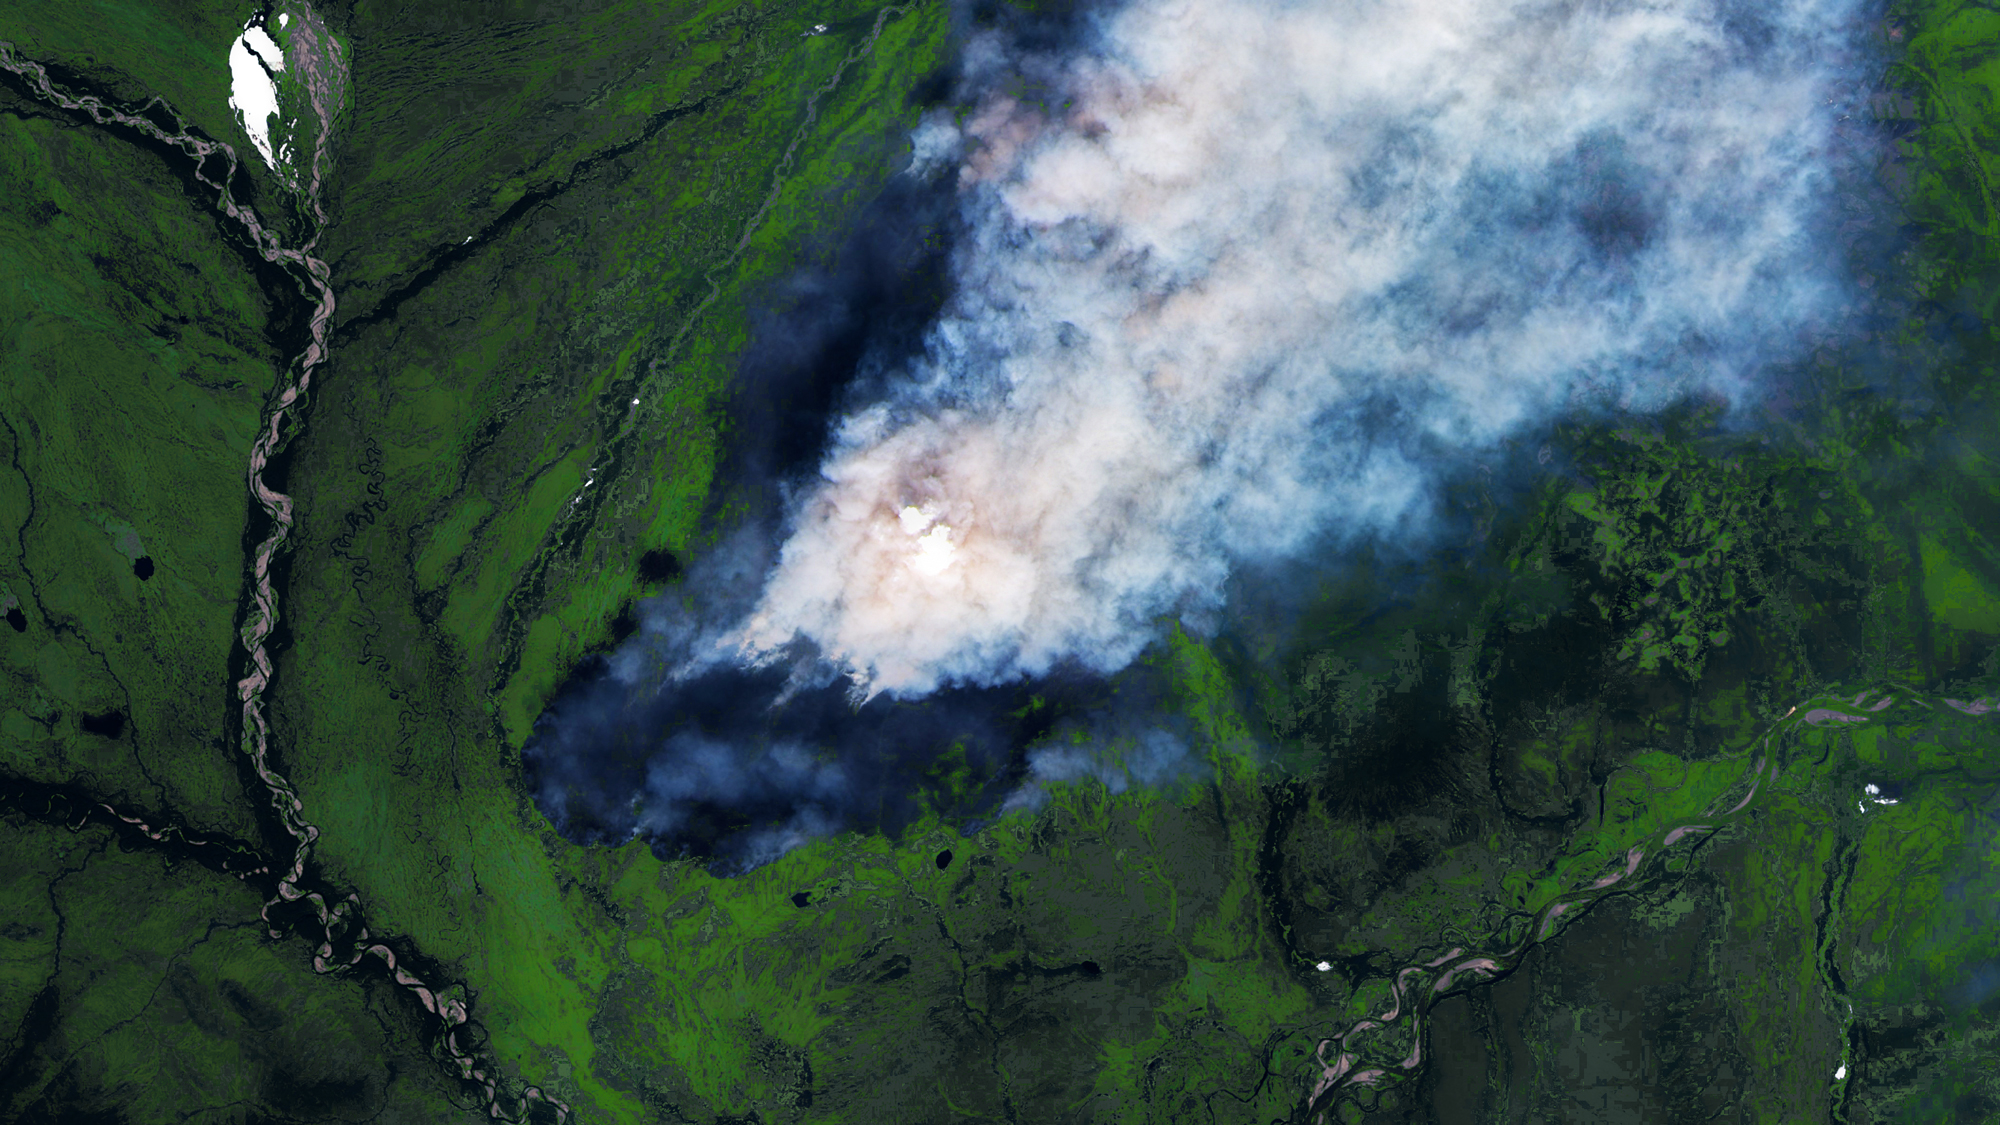 A wildfire burning above the Arctic Circle in Russia on June 14, 2020 (Image: Brian Kahn, G/O Media)